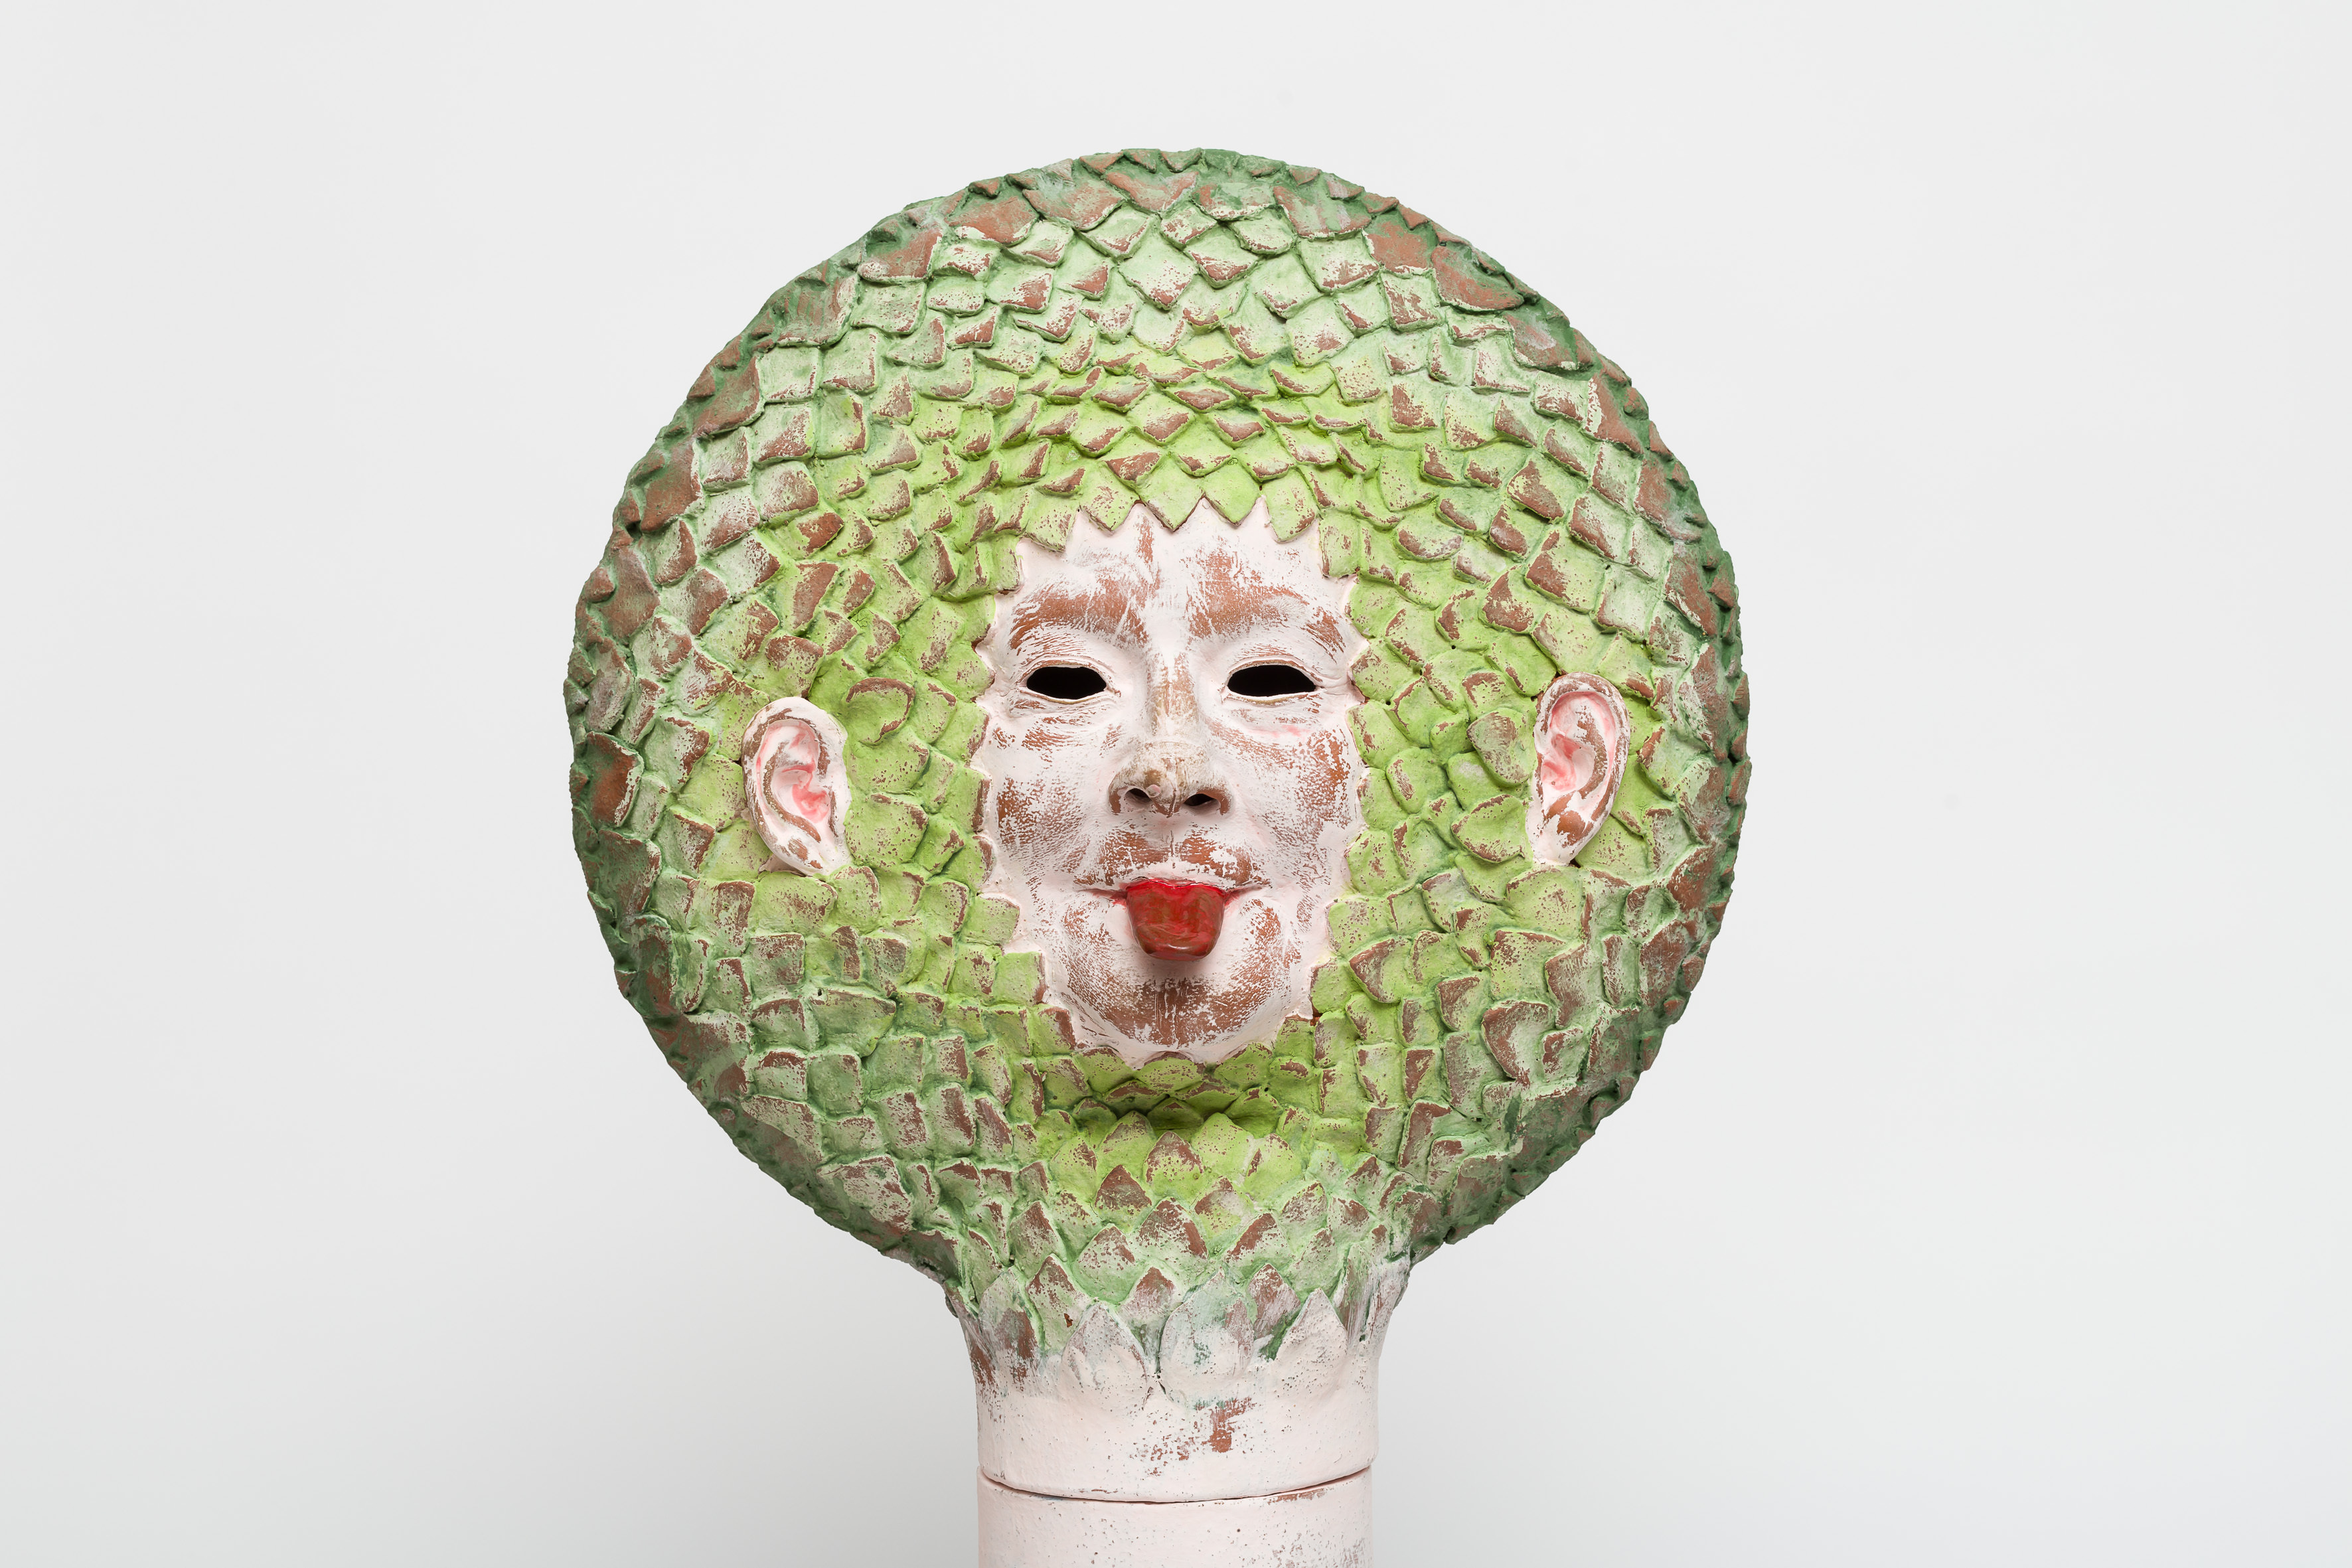 A ceramic face with it's tongue out, with green leaf-like hair.